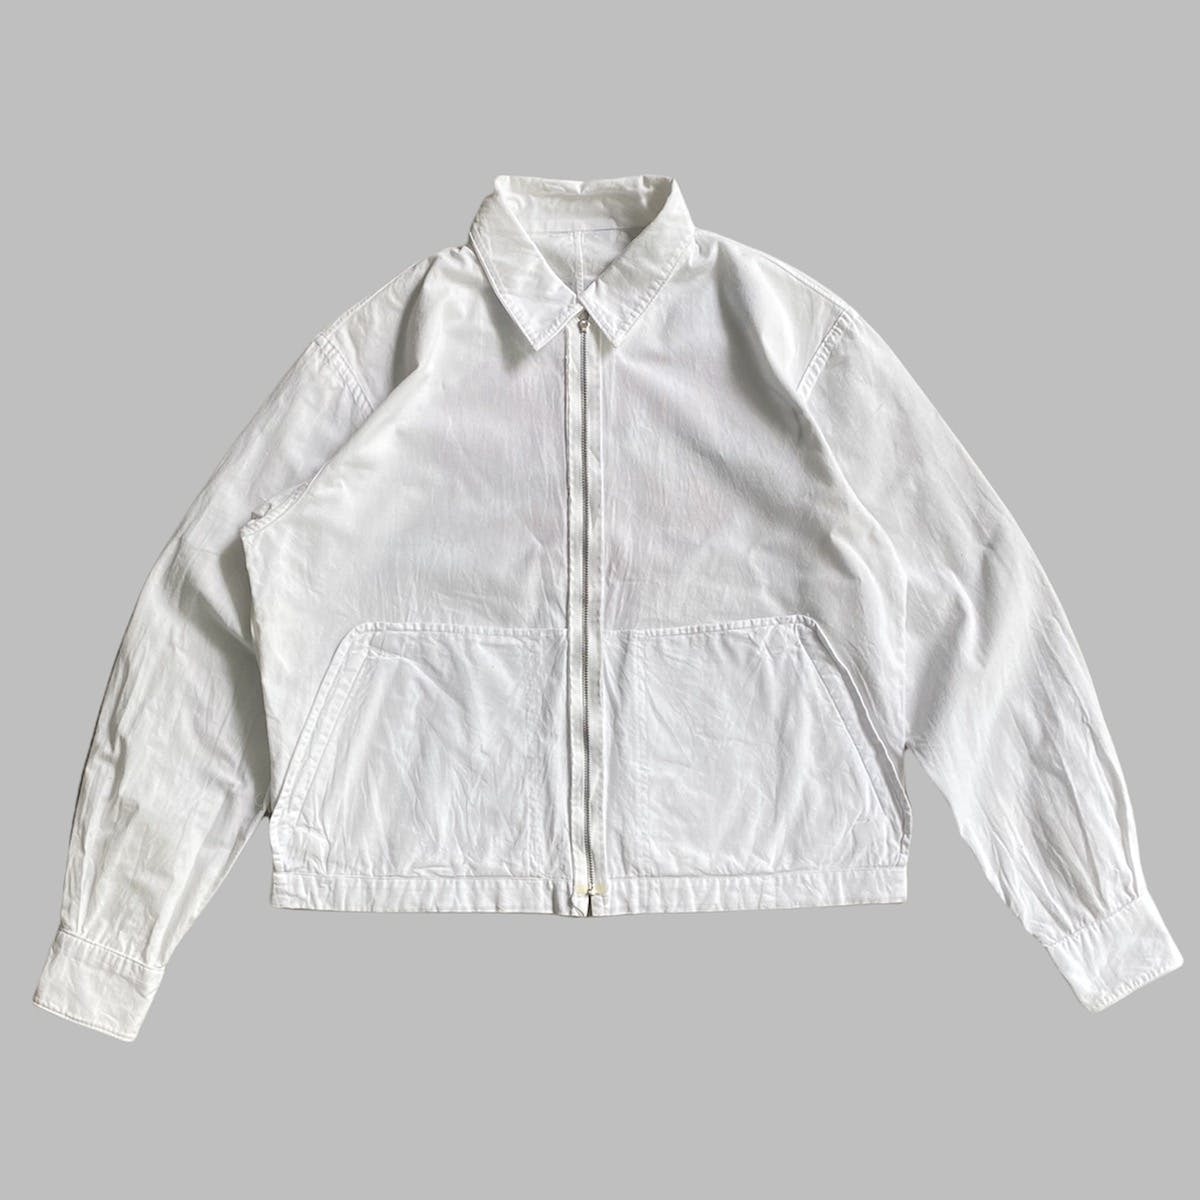 SS04 CDGHP France Route “Carole” Jacket - 2